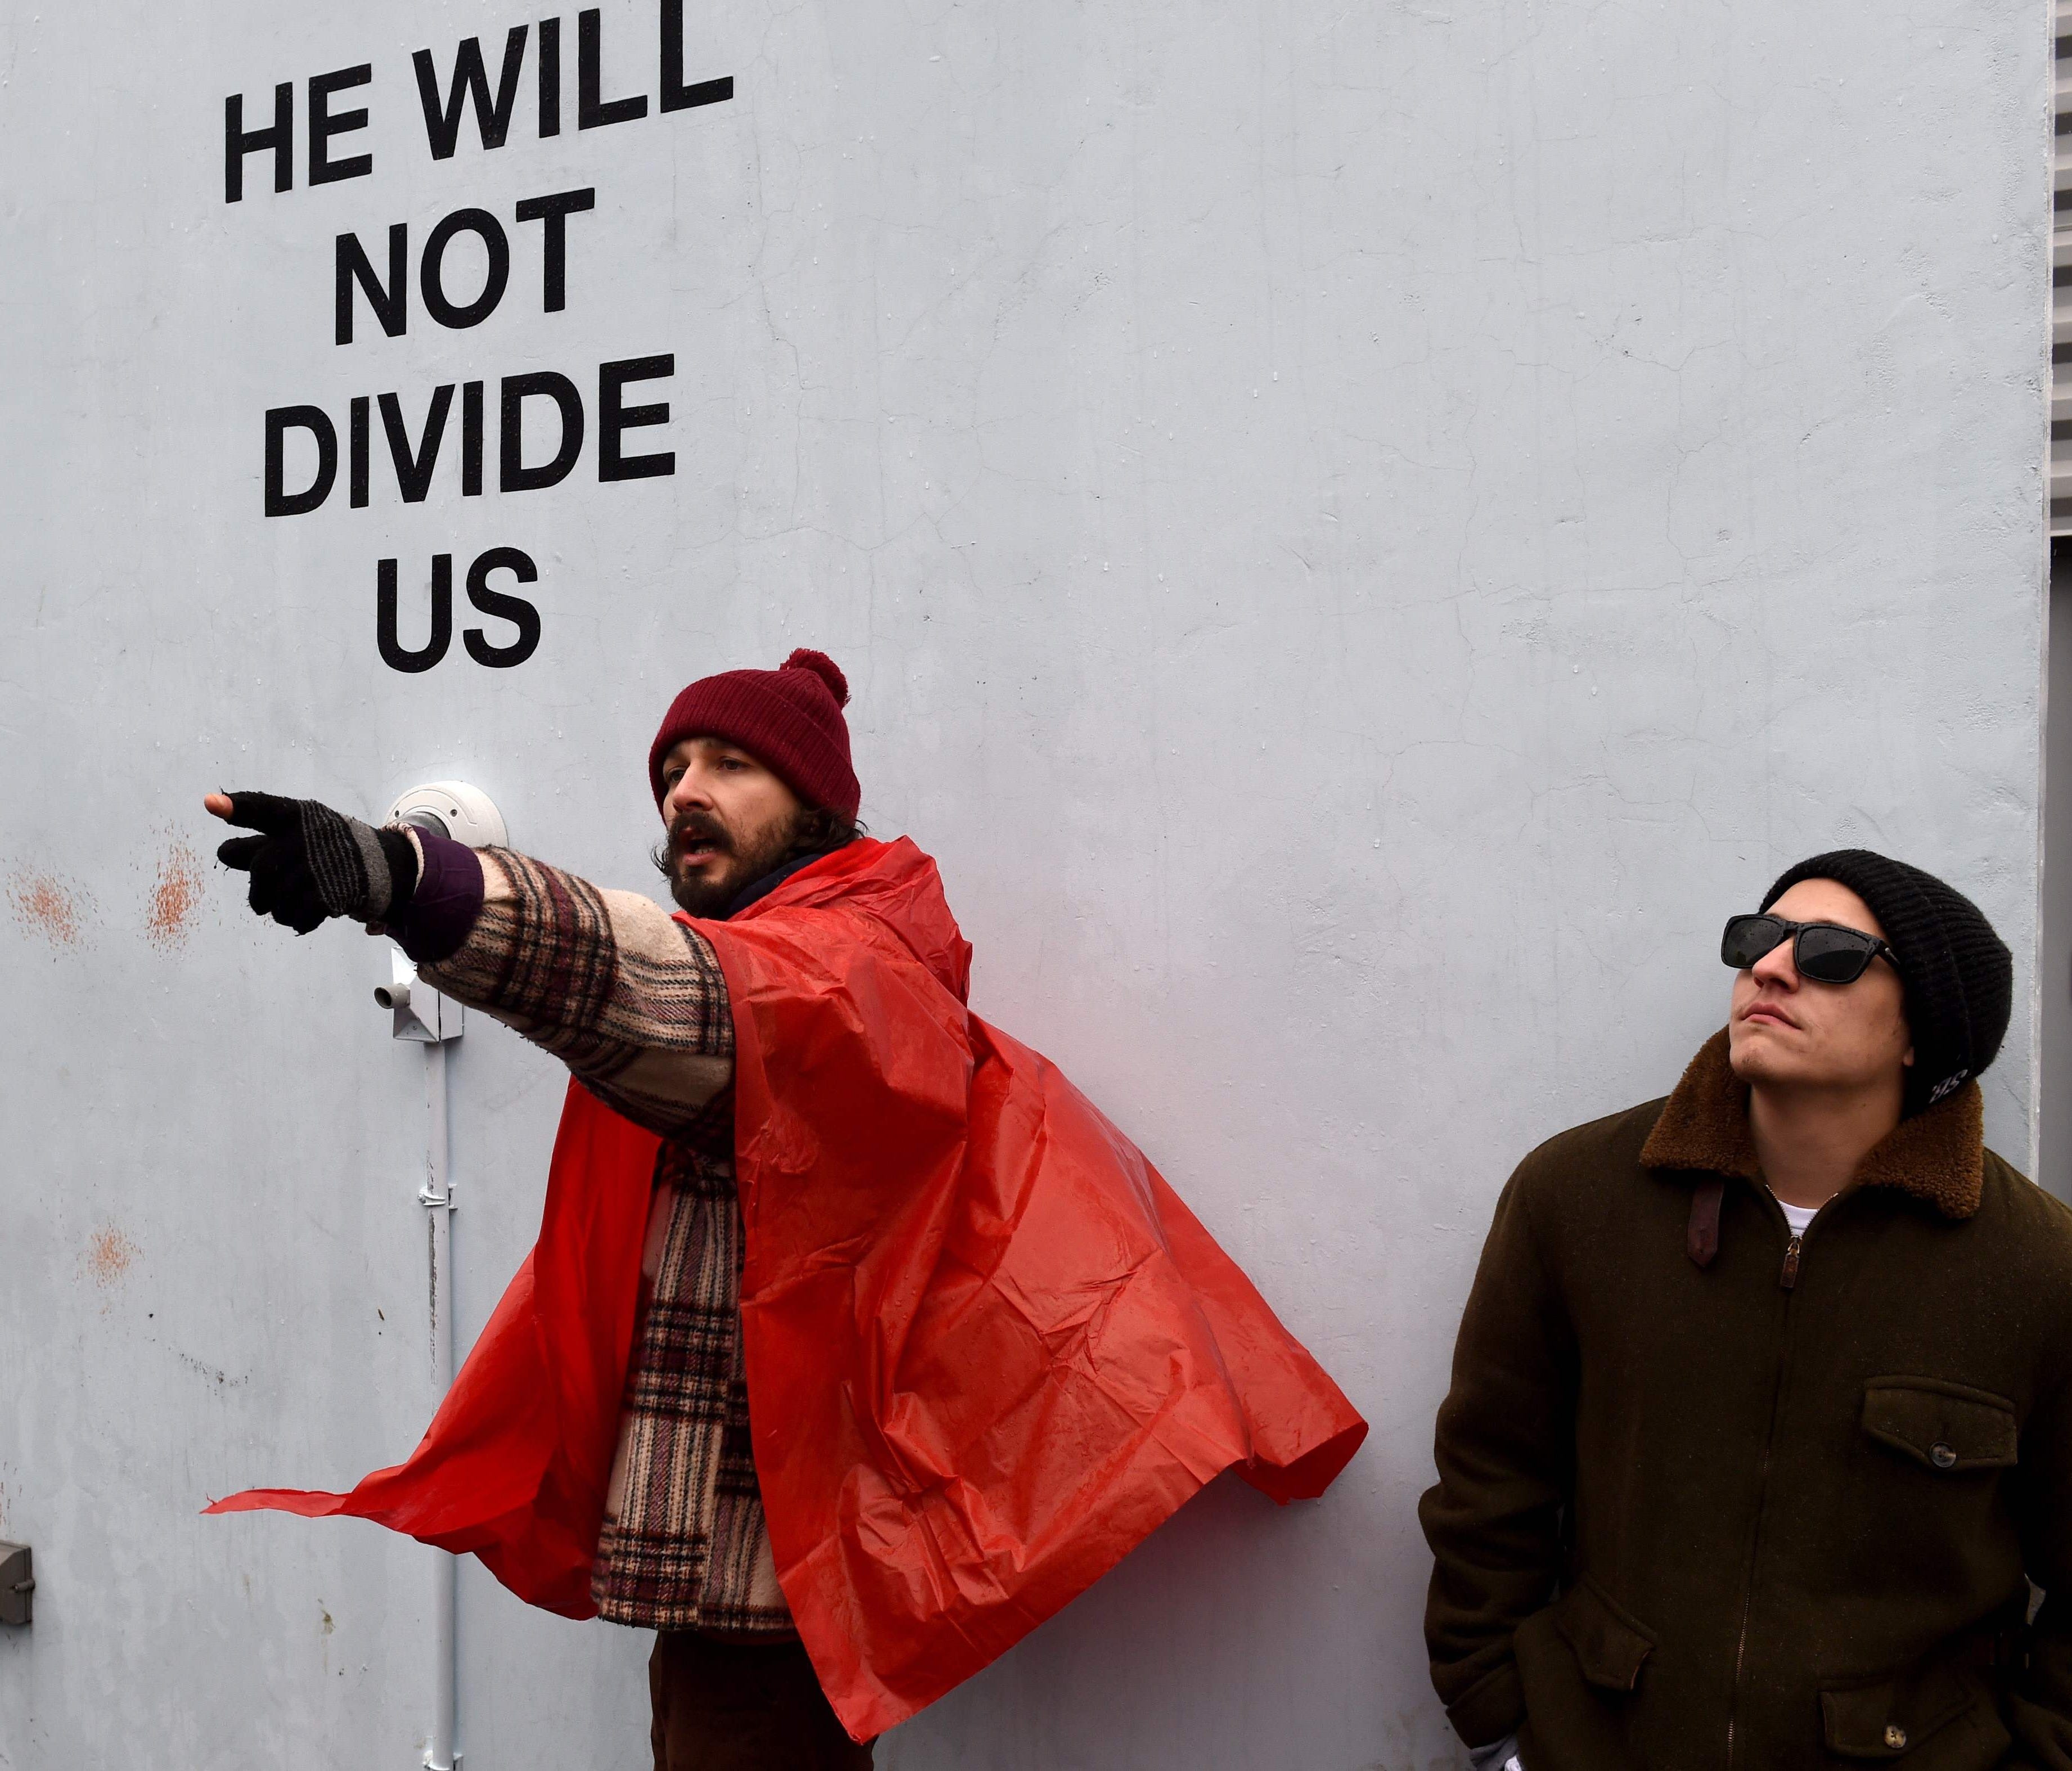 Actor Shia LaBeouf during his 'He Will Not Divide Us' livestream outside the Museum of the Moving Image in Astoria, in the Queens borough of New York Jan. 24, 2017 as a protest against President Trump.